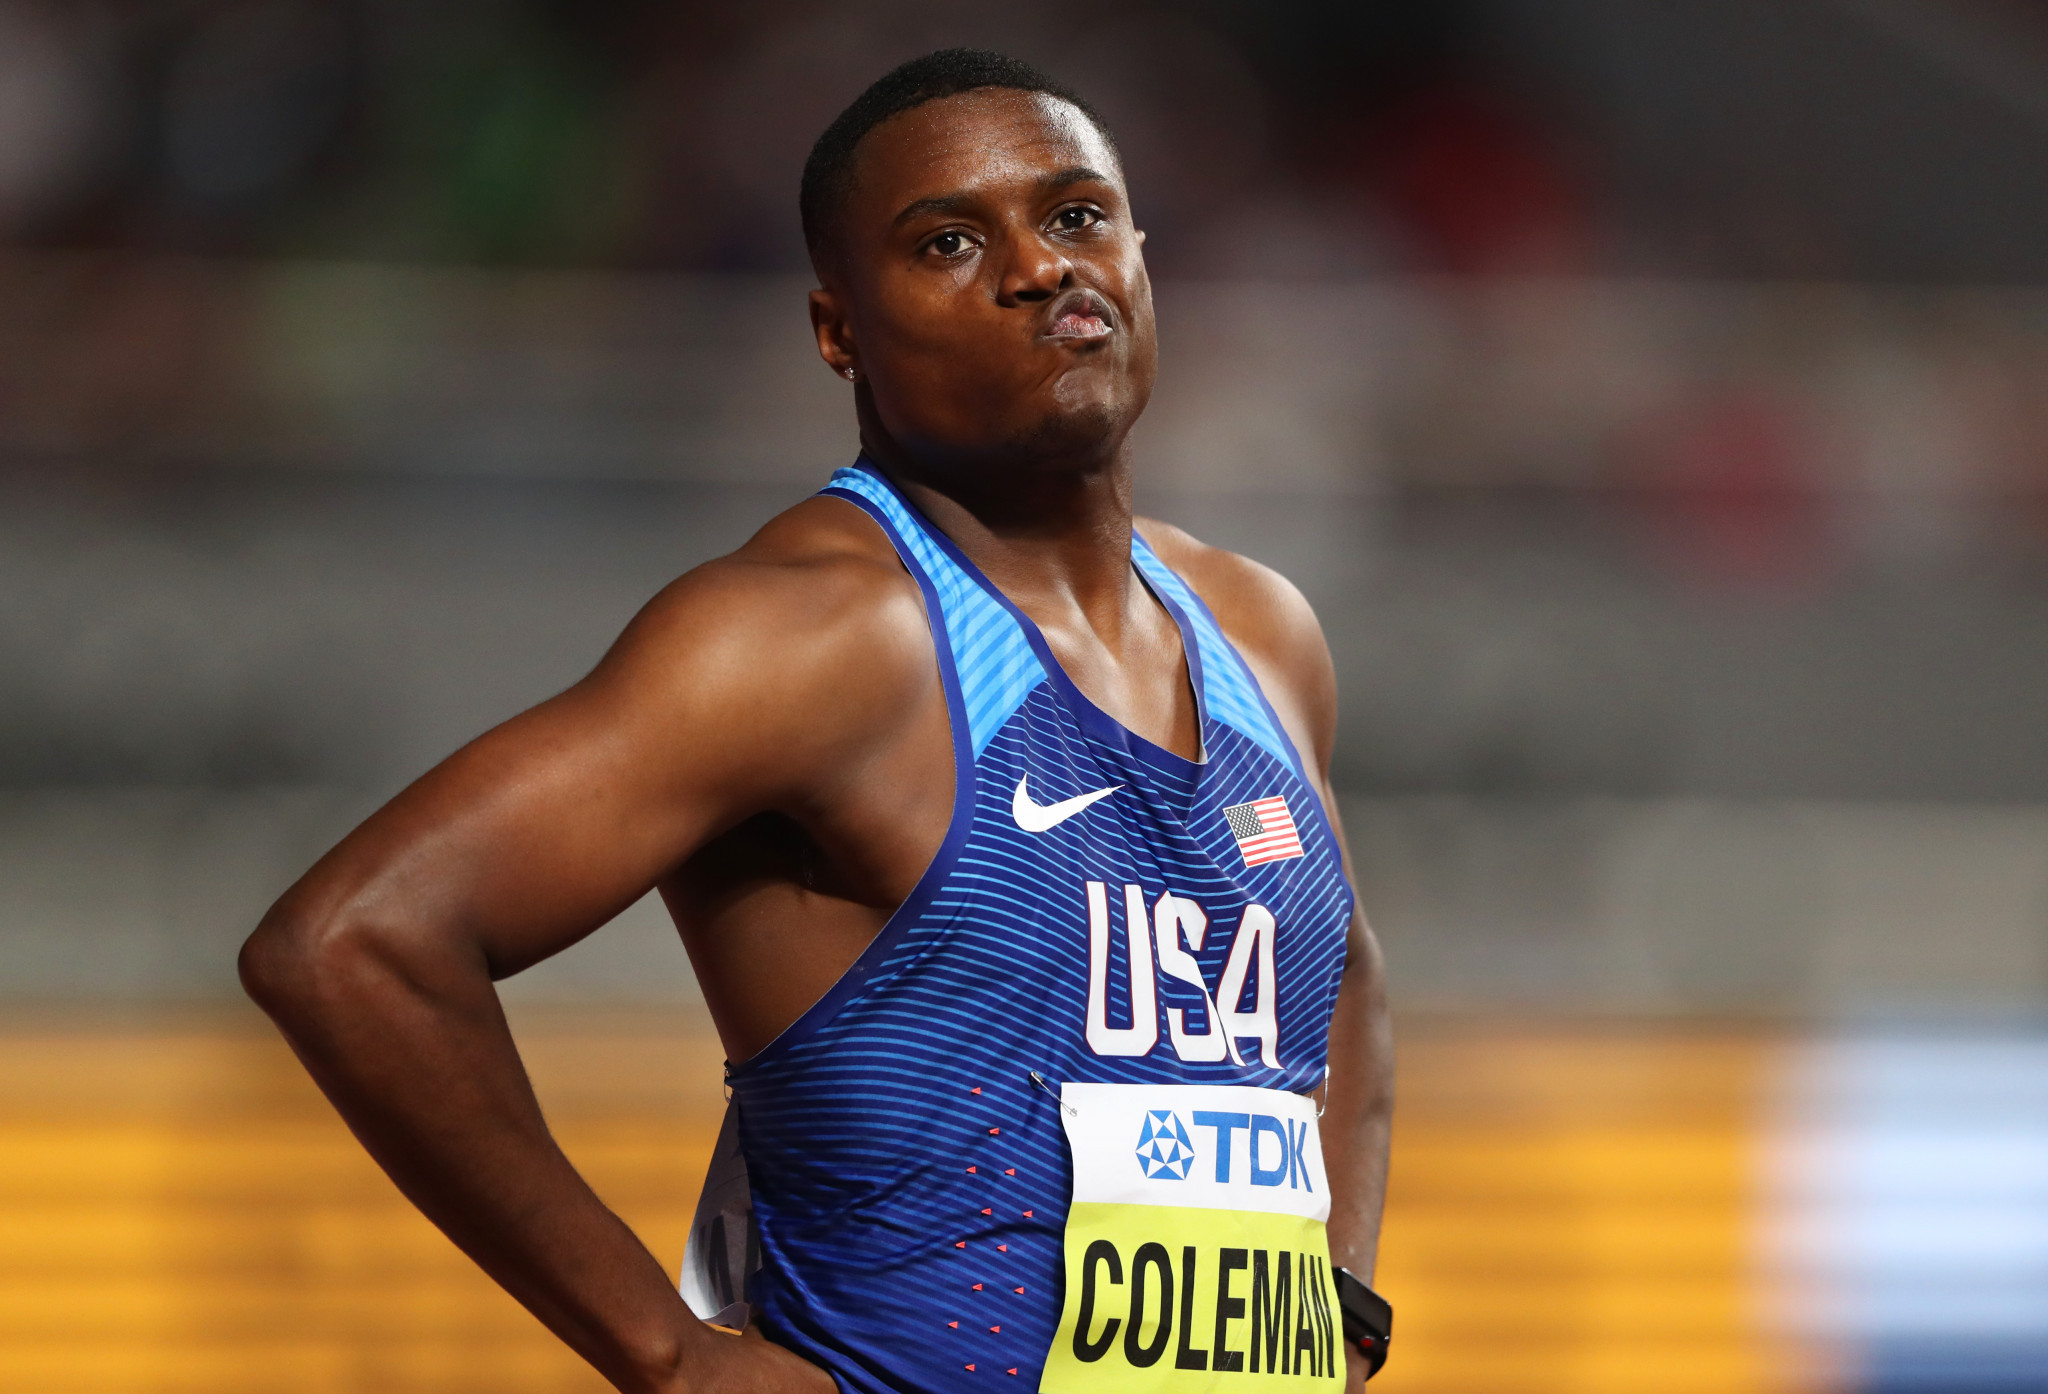 Christian Coleman will miss Tokyo 2020 ©Getty Images